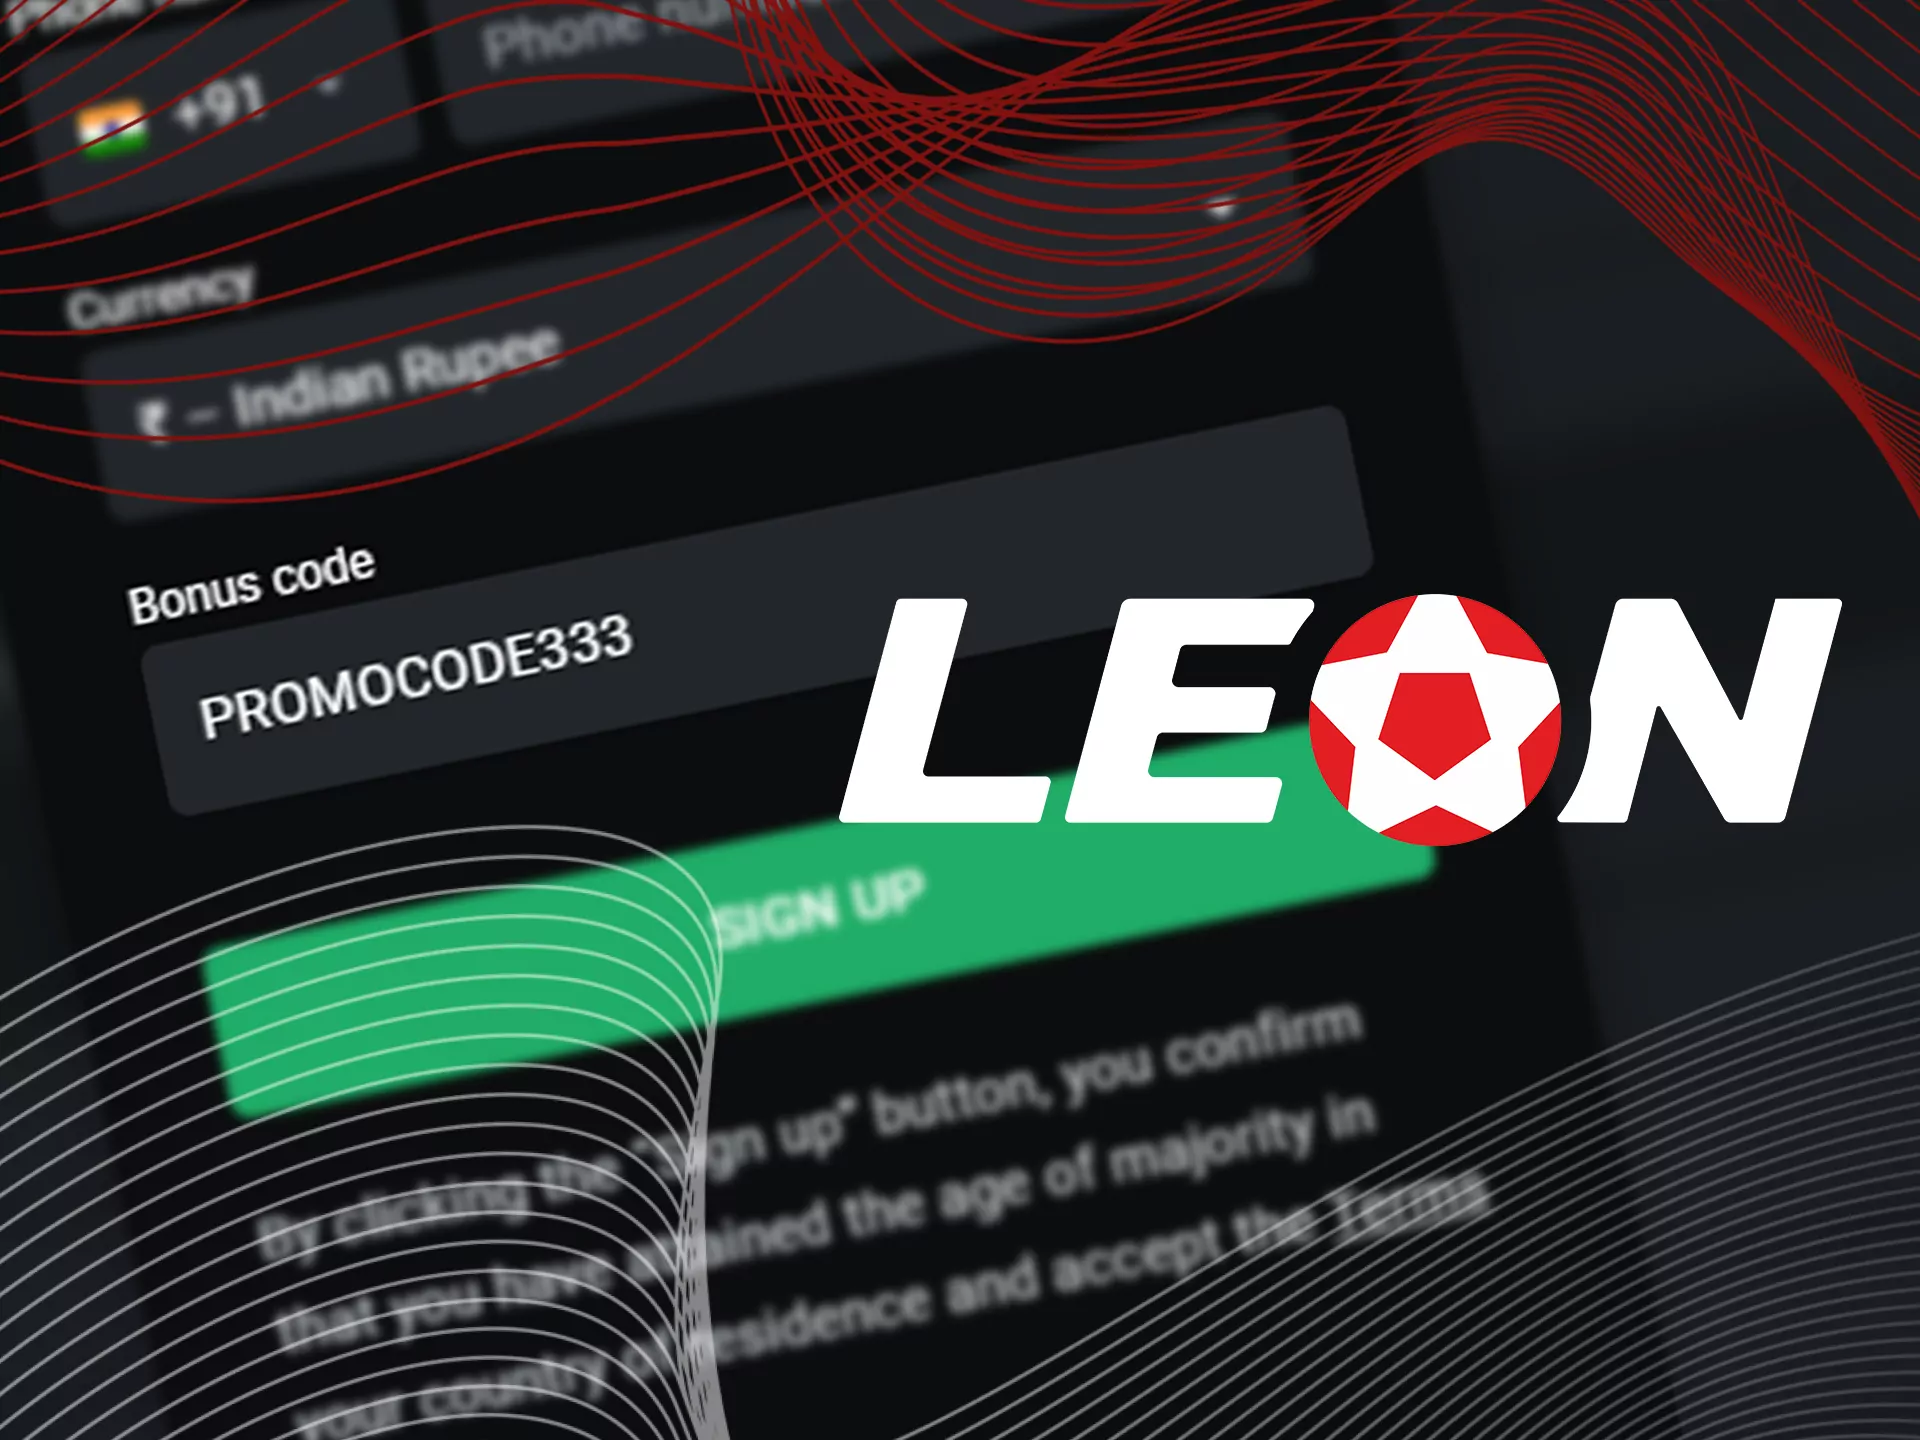 Use our promo code ot get bonuses at Leon Bet.